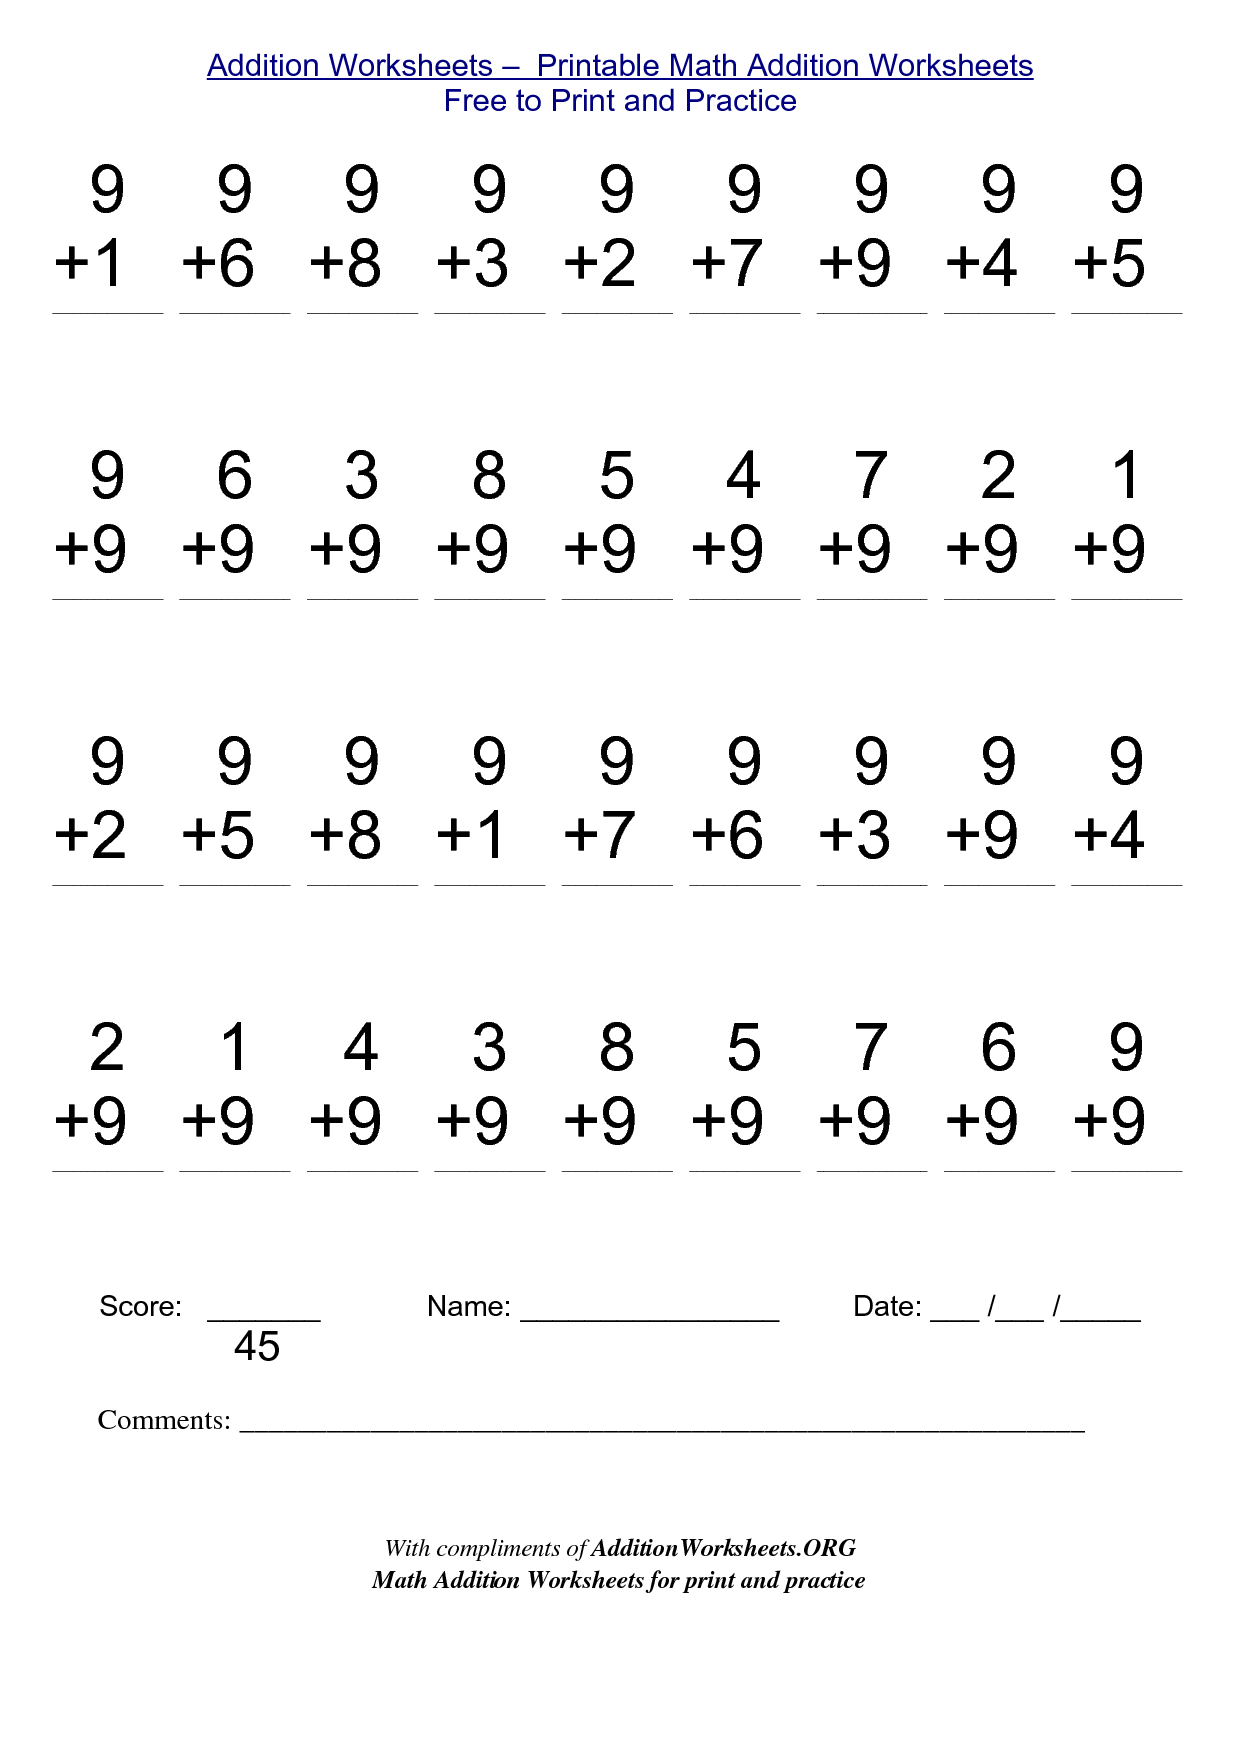 Math Worksheets For Free To Print - Alot | Me | Math Worksheets - Free Printable Second Grade Worksheets